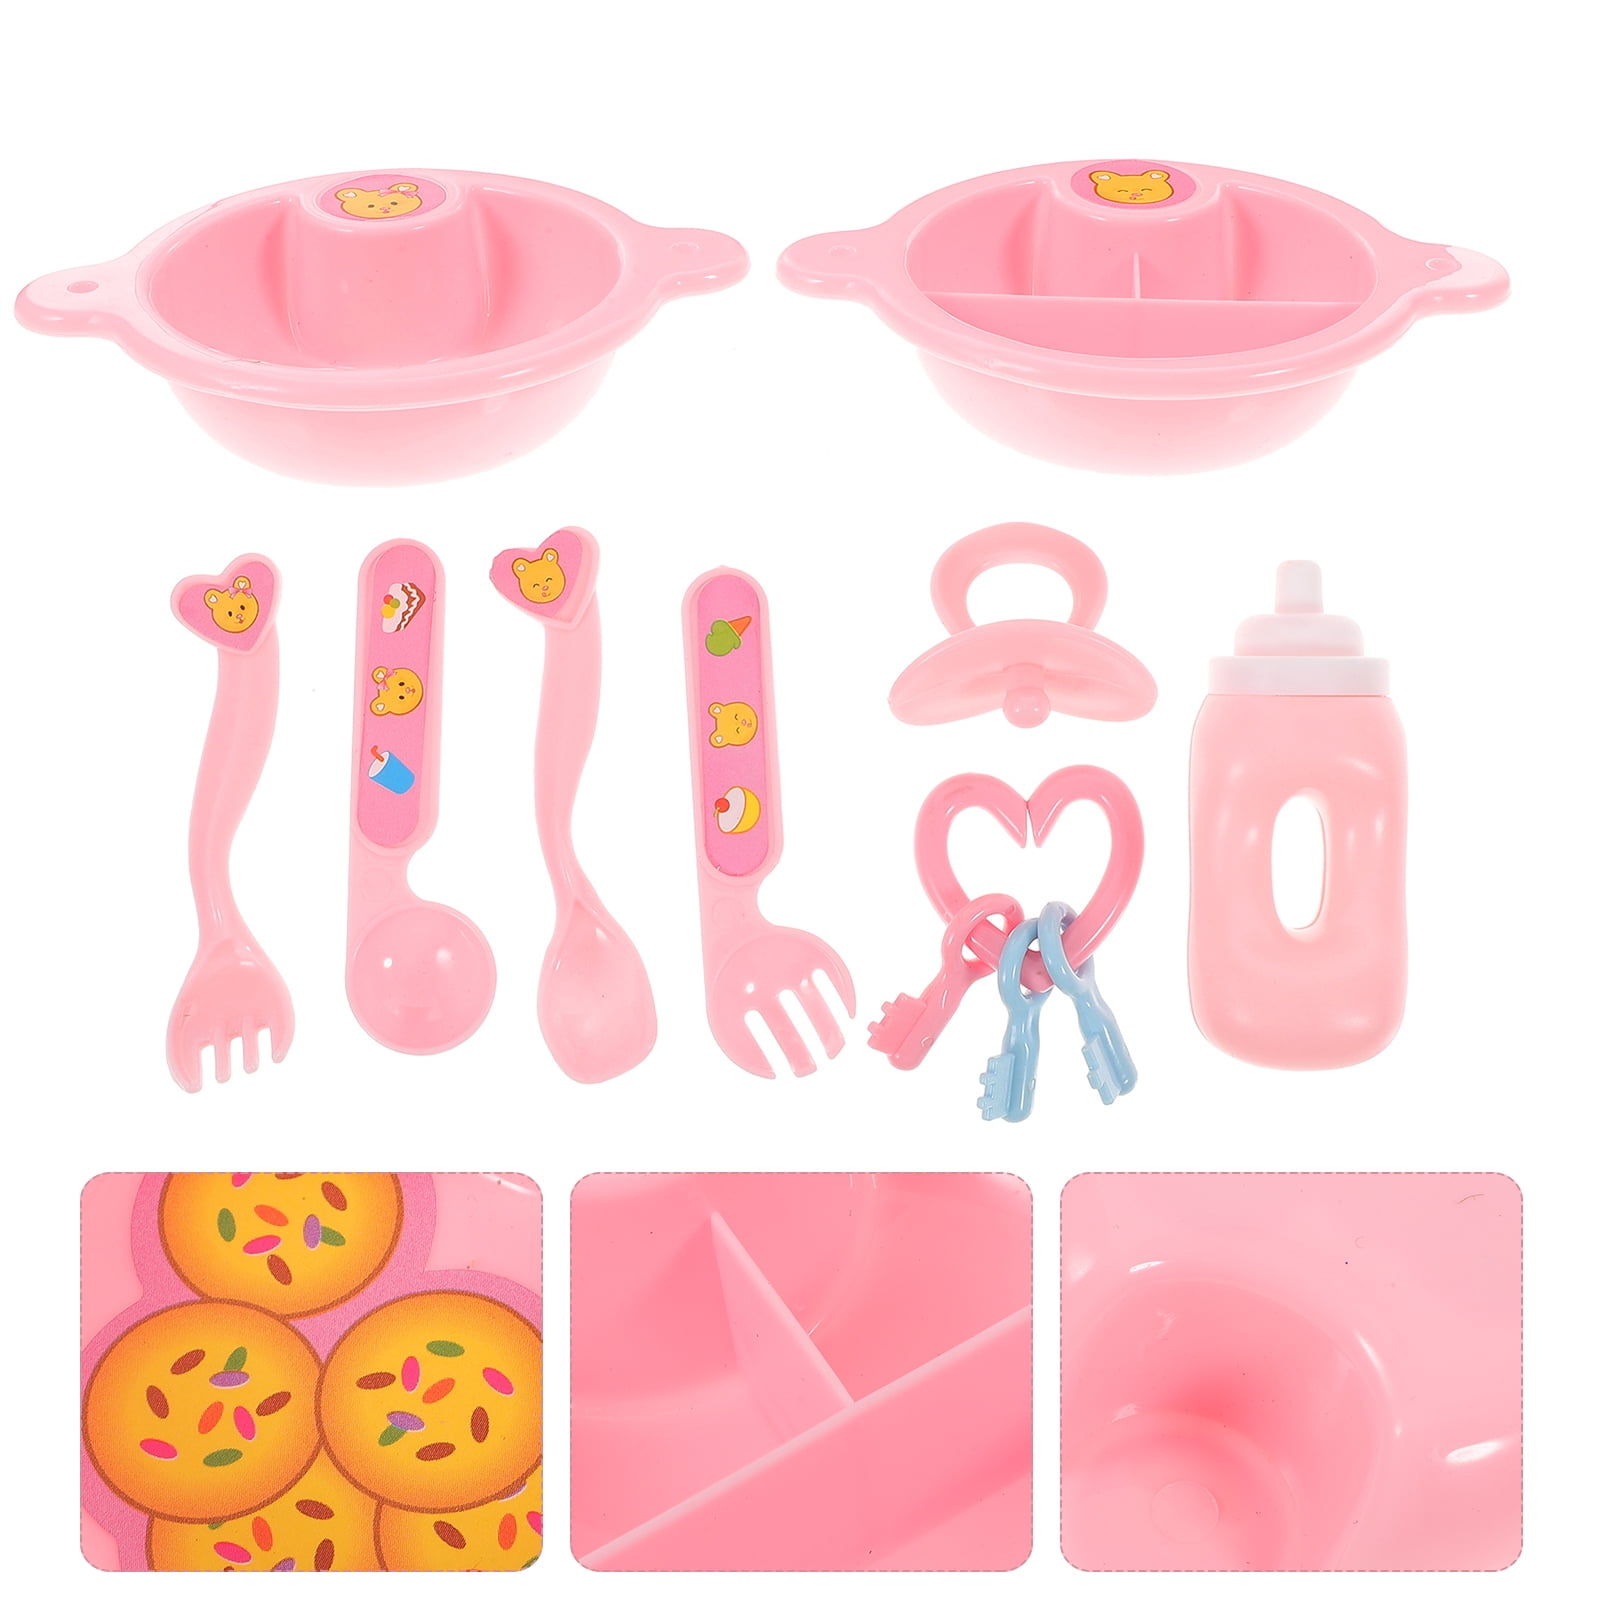 Cuteam Simulation Doll House Music And Light 3D Folding Early Education  Entertainment Baby Pretend Toy Cooking Coffee House Toy Baby Products 